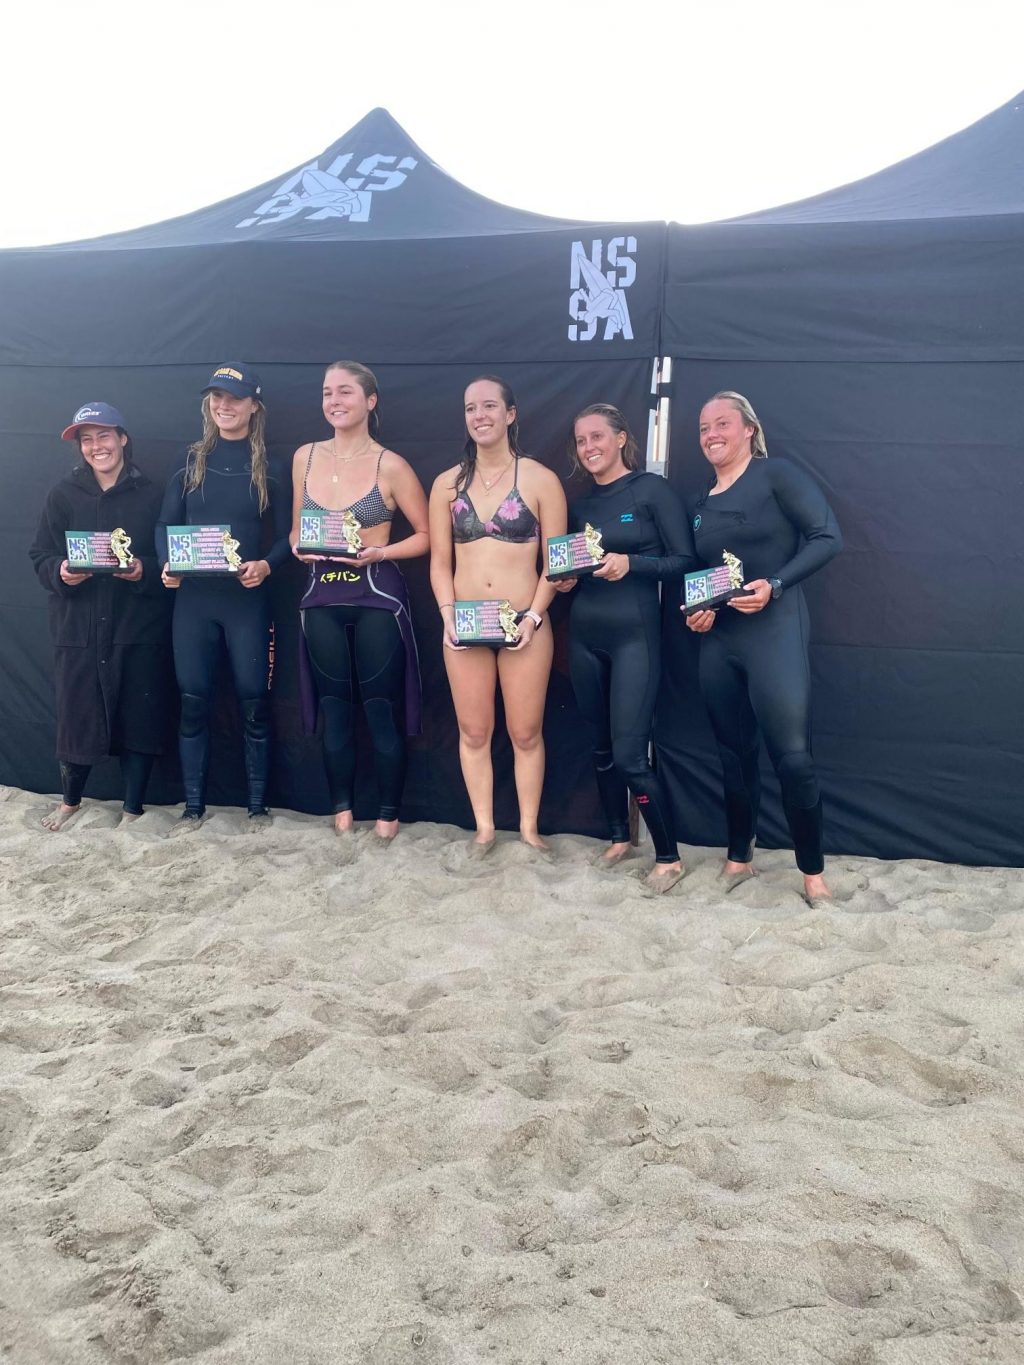 Members of Pepperdine Surf Team poses for a picture after the NSSA Ventura Harbor Contest on Nov. 7. Alderton said this was her favorite memory so far being part of the surfing team.